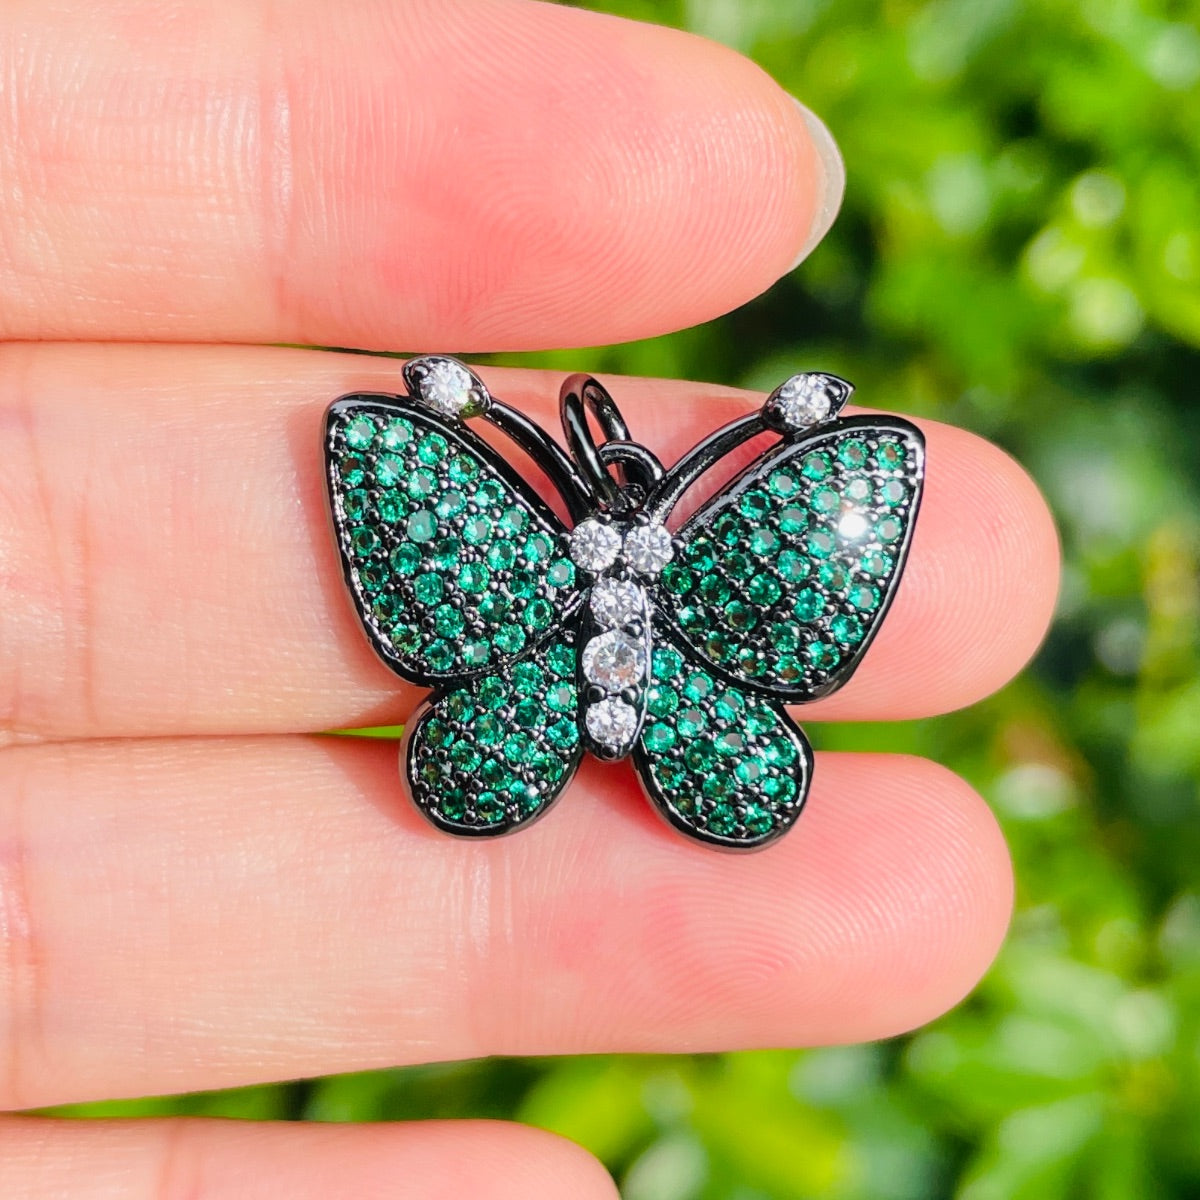 5pcs/lot 25*20mm Multicolor CZ Paved Butterfly Charms Green on Black CZ Paved Charms Butterflies Colorful Zirconia New Charms Arrivals Charms Beads Beyond